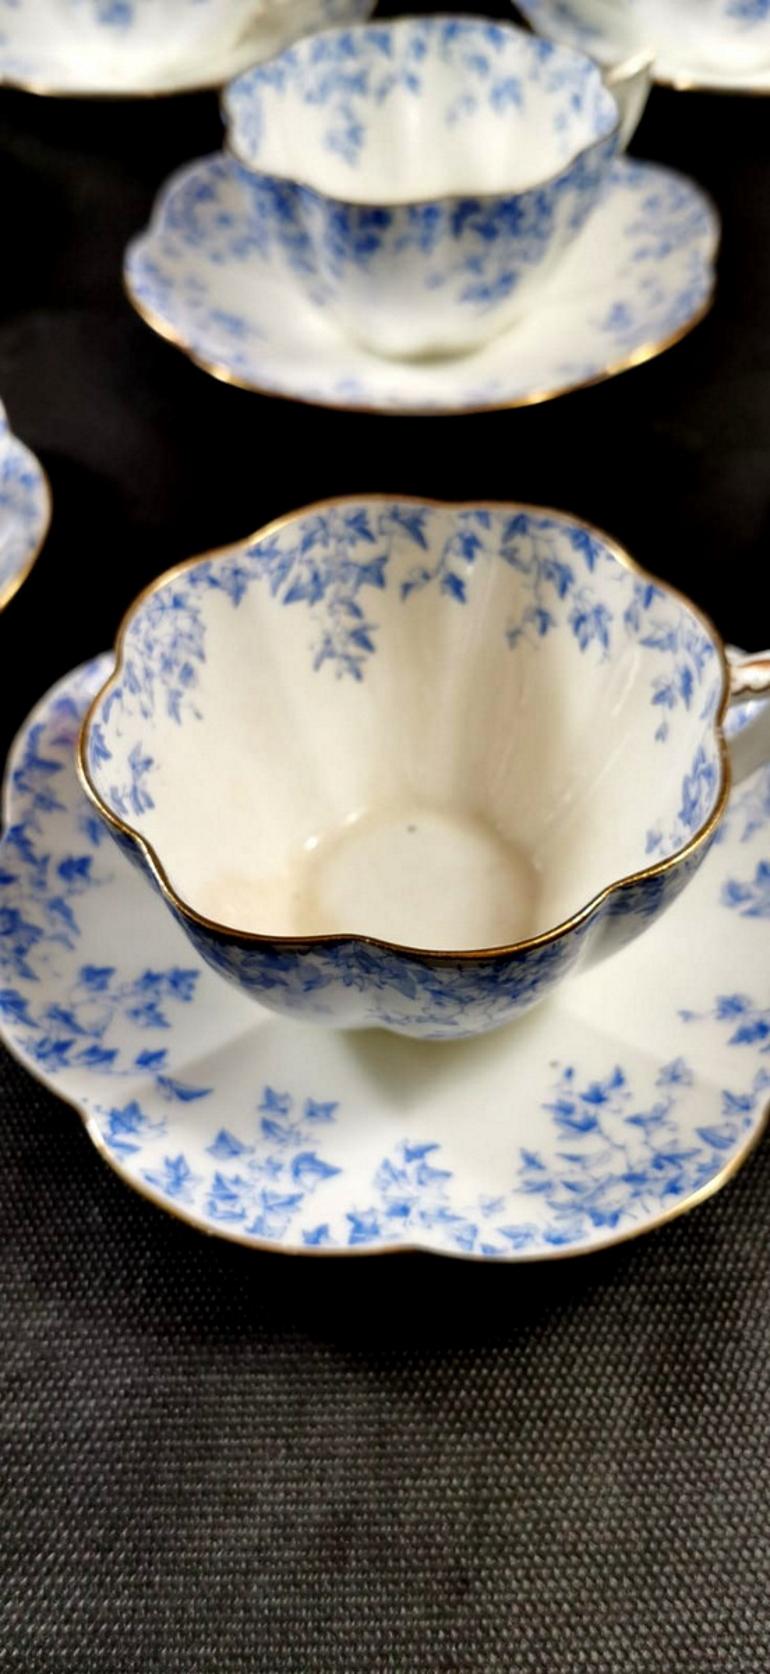 Staffordshire Porcelain Service English Coffee-Tea Cups with Plate 3